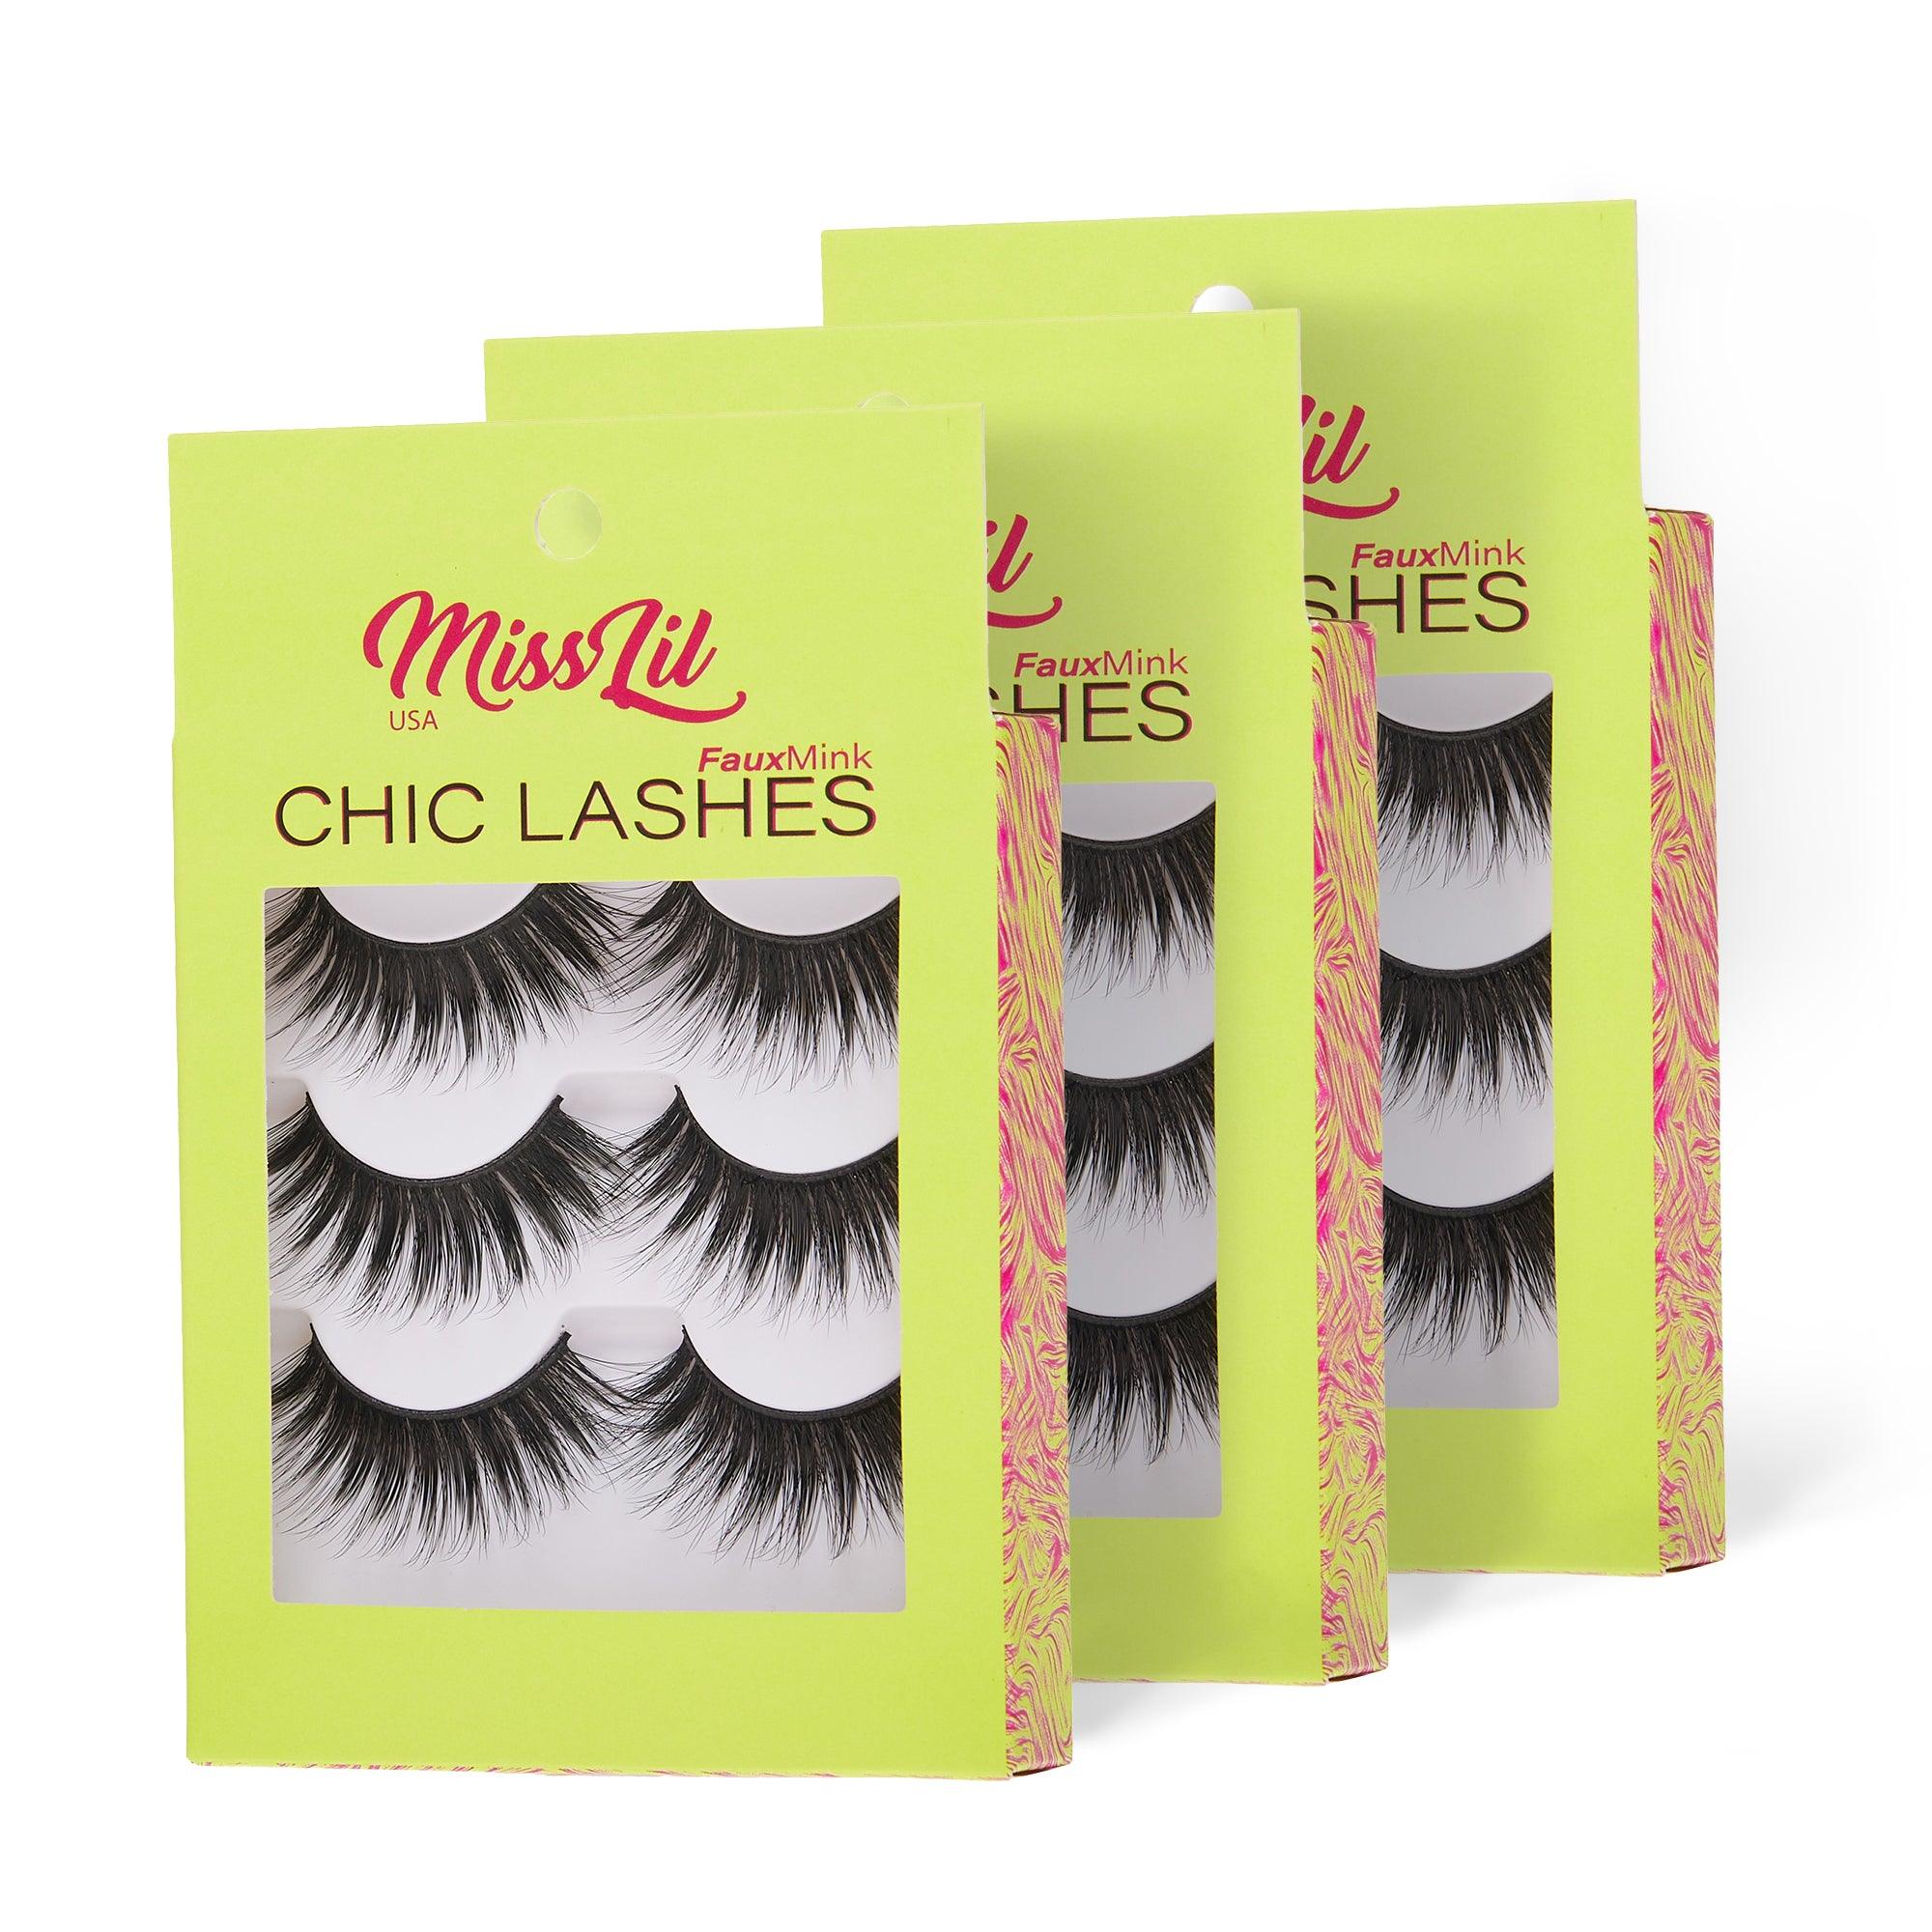 3-Pair Faux Mink Eyelashes - Chic Lashes Collection #18 - Pack of 3 - Miss Lil USA